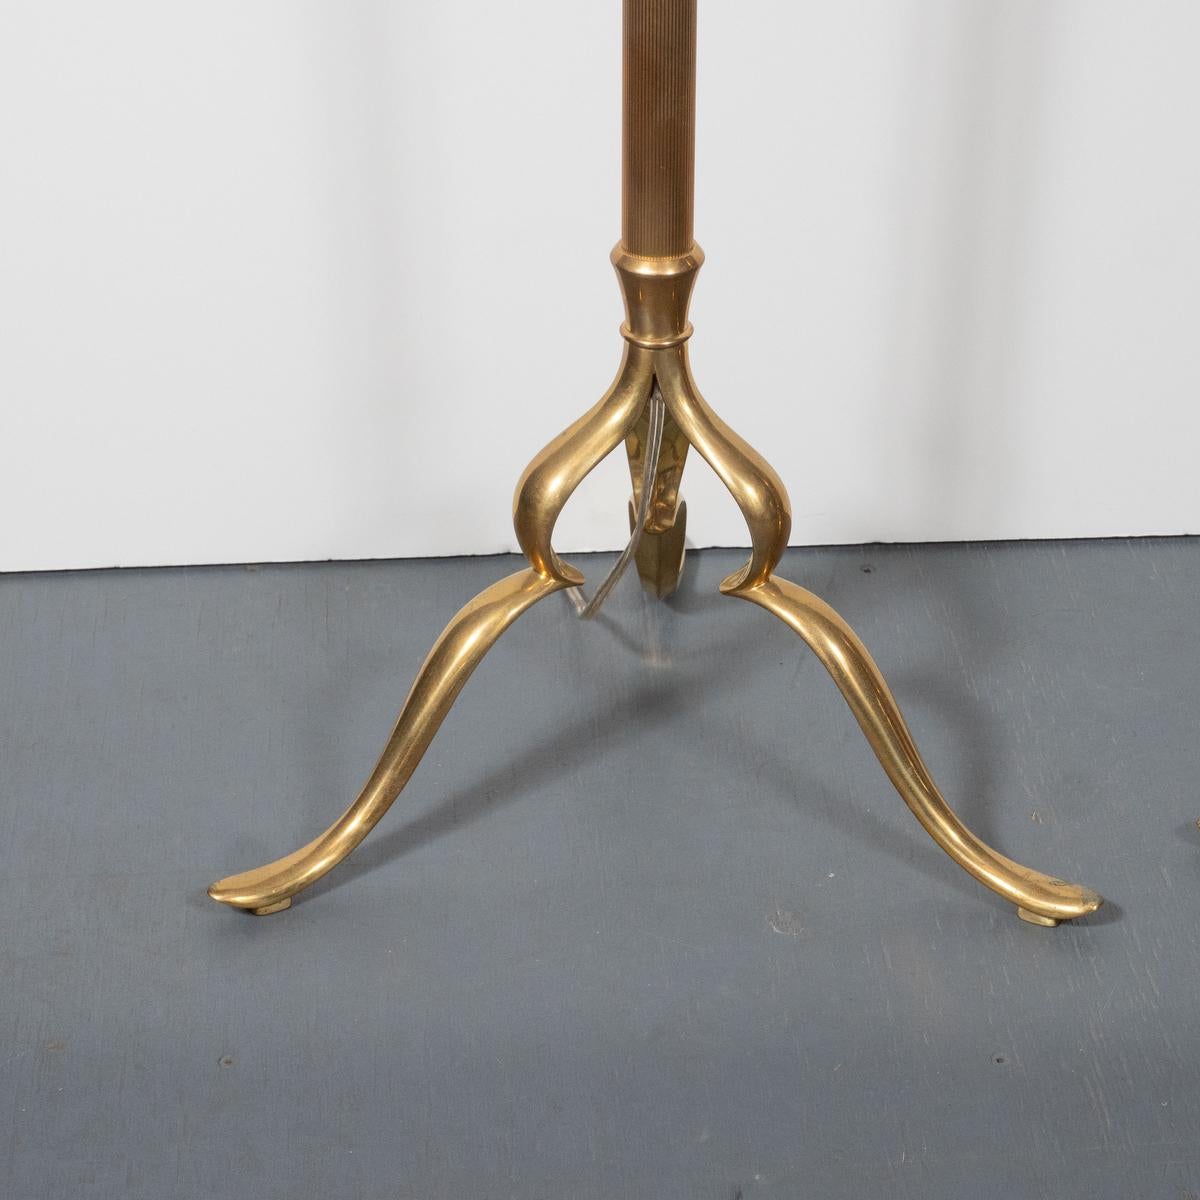 Pair of Sculptural Fluted Brass Floor Lamps In Good Condition For Sale In Tarrytown, NY